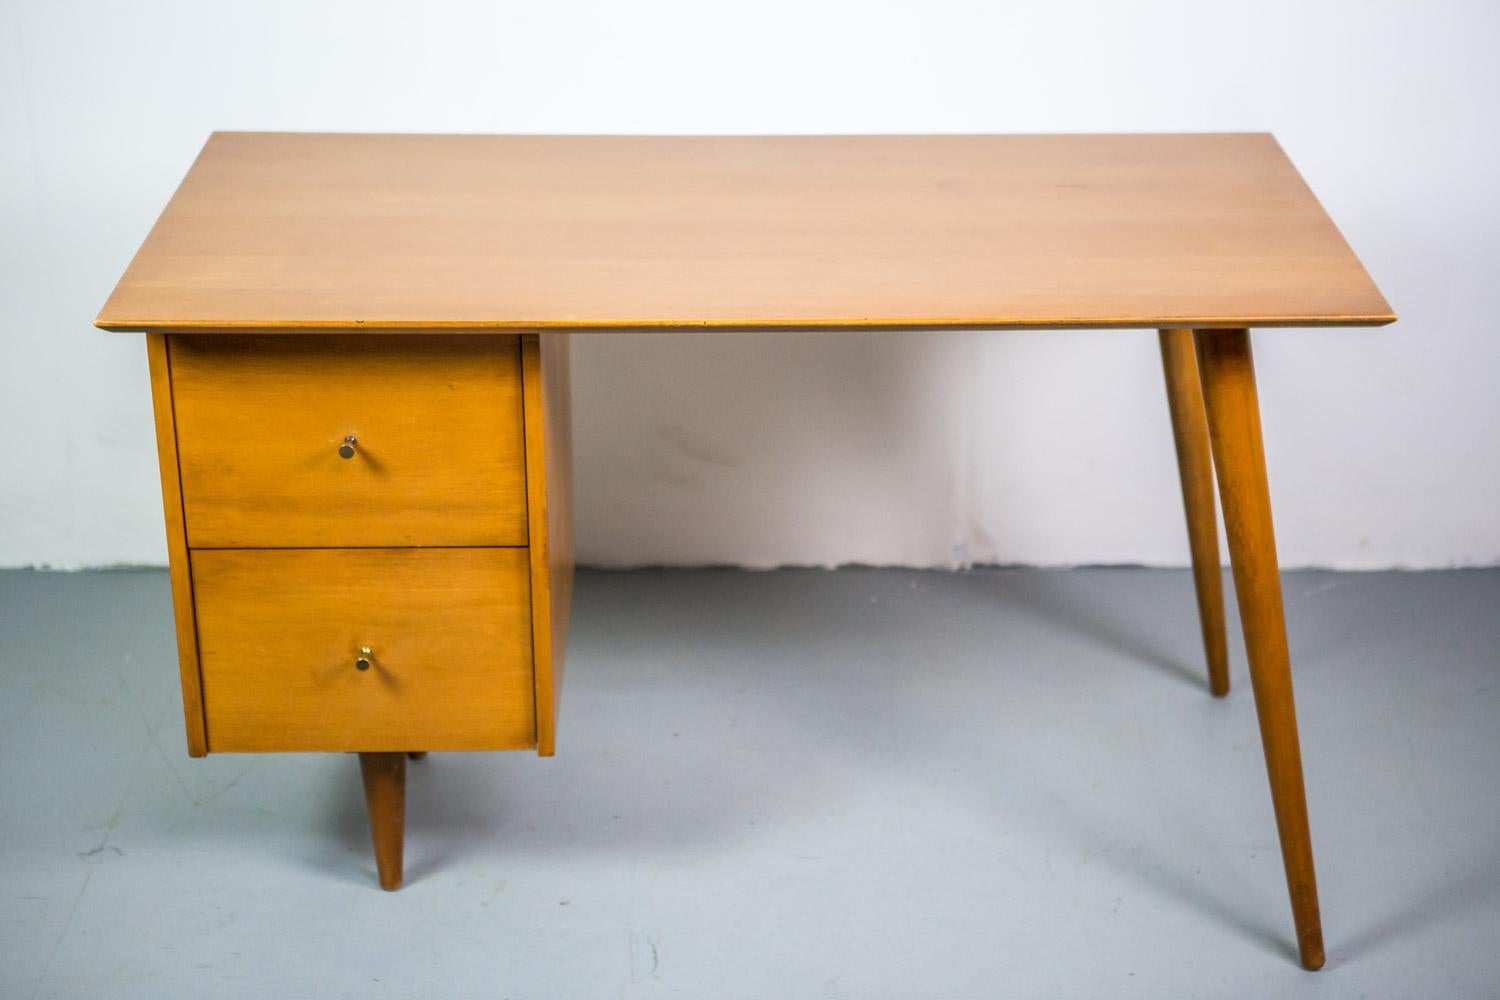 This exceptional early desk was designed by Paul McCobb and produced by Planner Group. Executed in solid maple, angular tapered legs and two desk drawers with conical brass pulls.